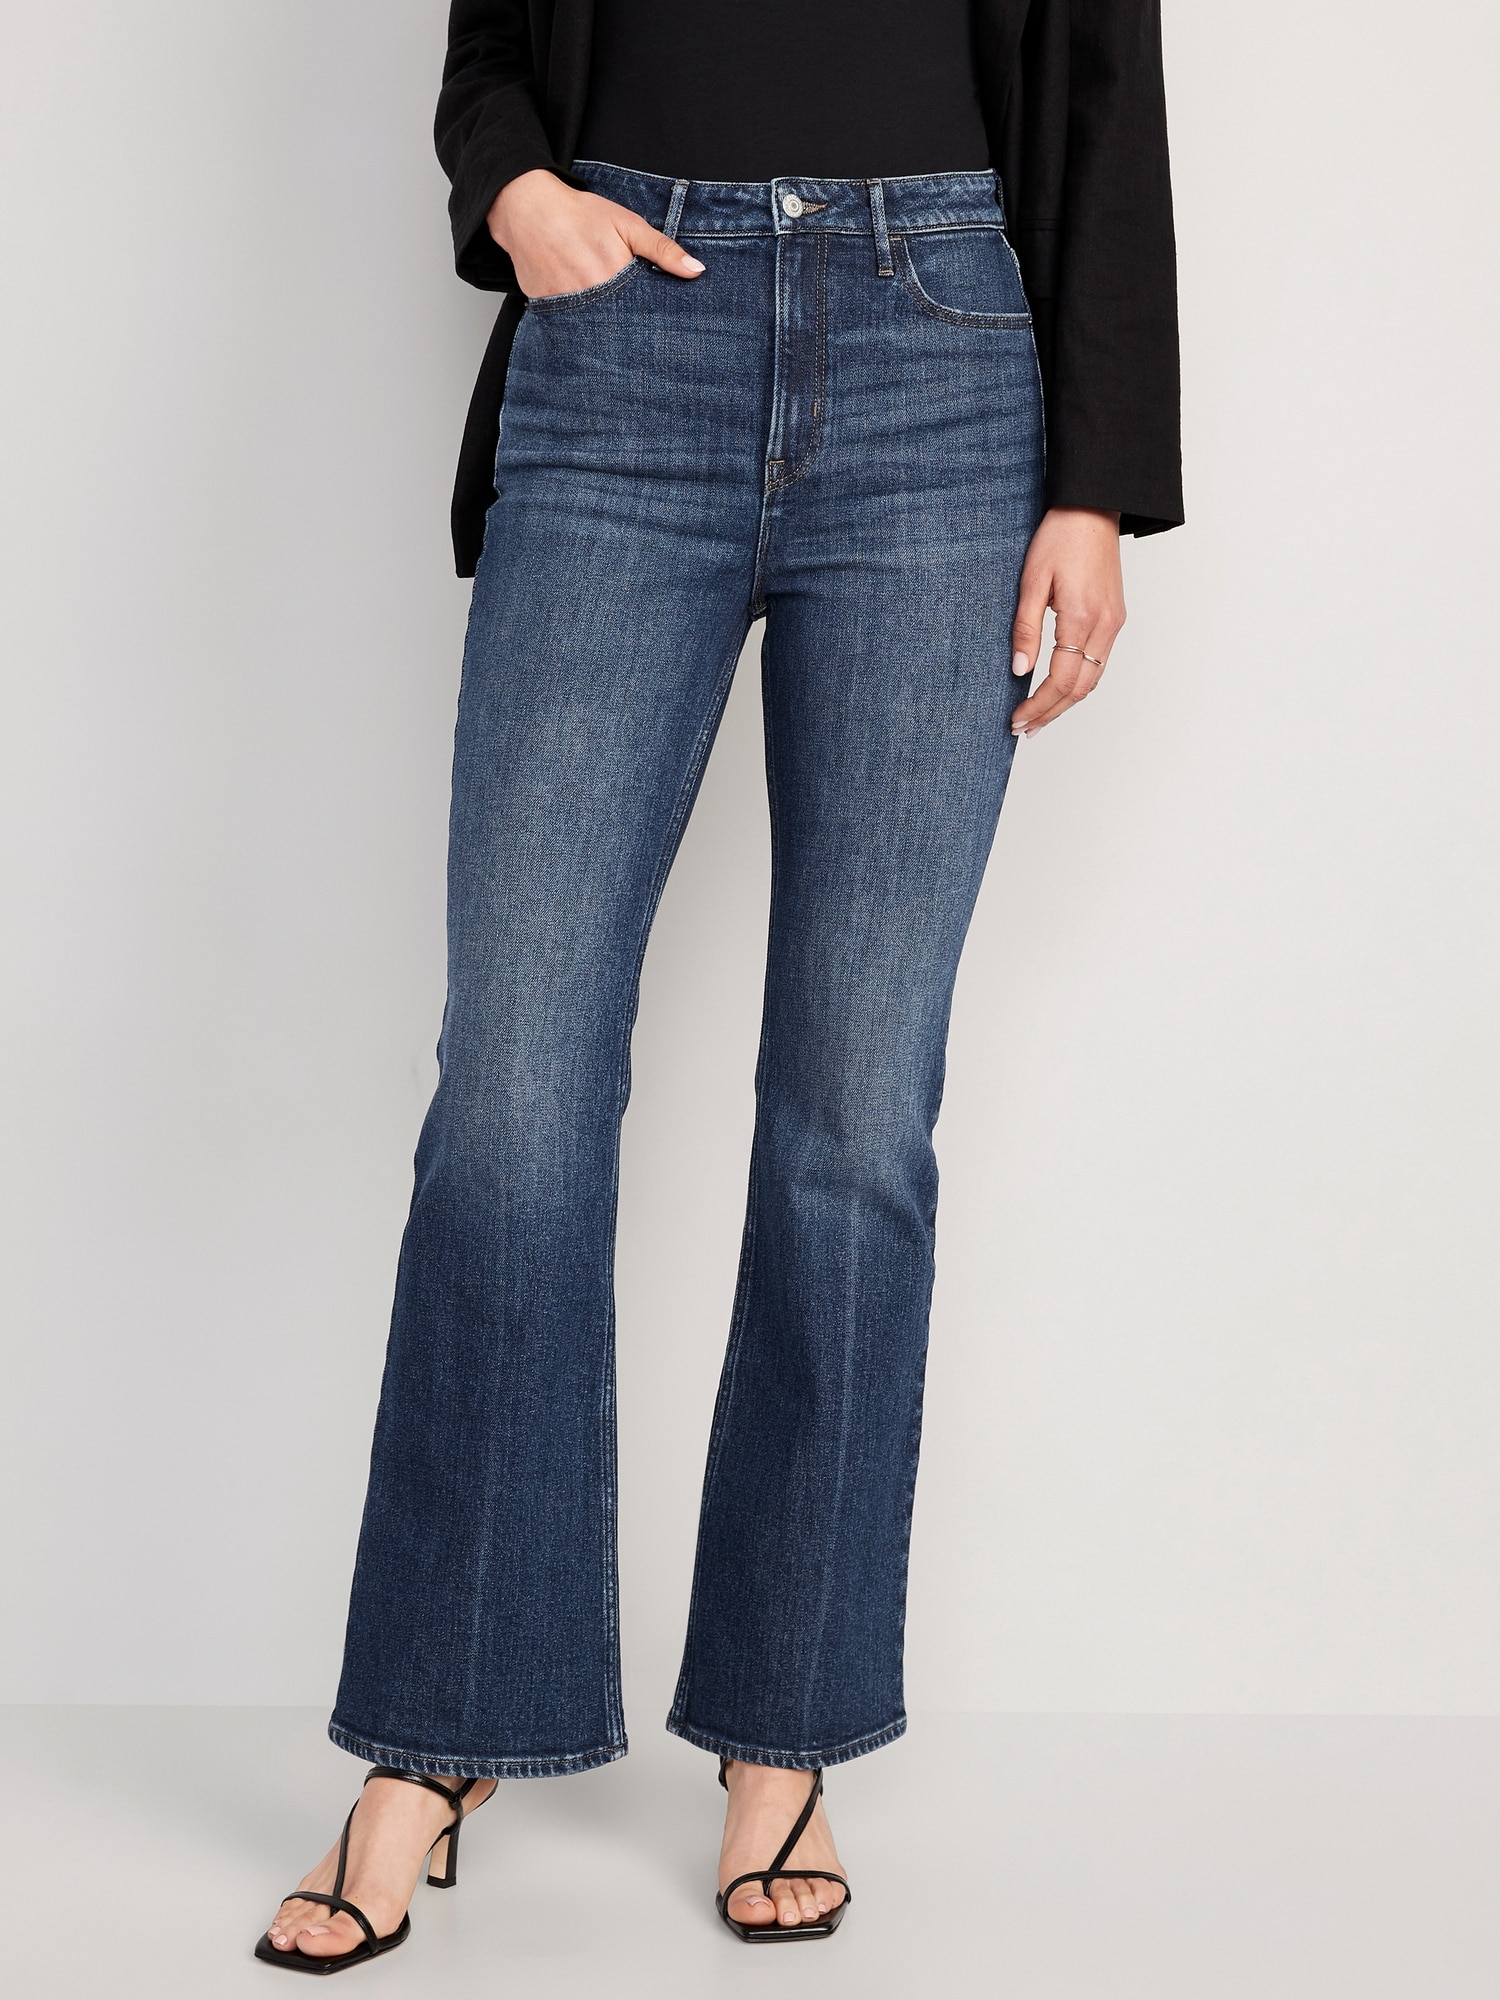 Old Navy Black Stretch Denim High Rise Flare Jeans 22 New Size undefined -  $34 - From Meg